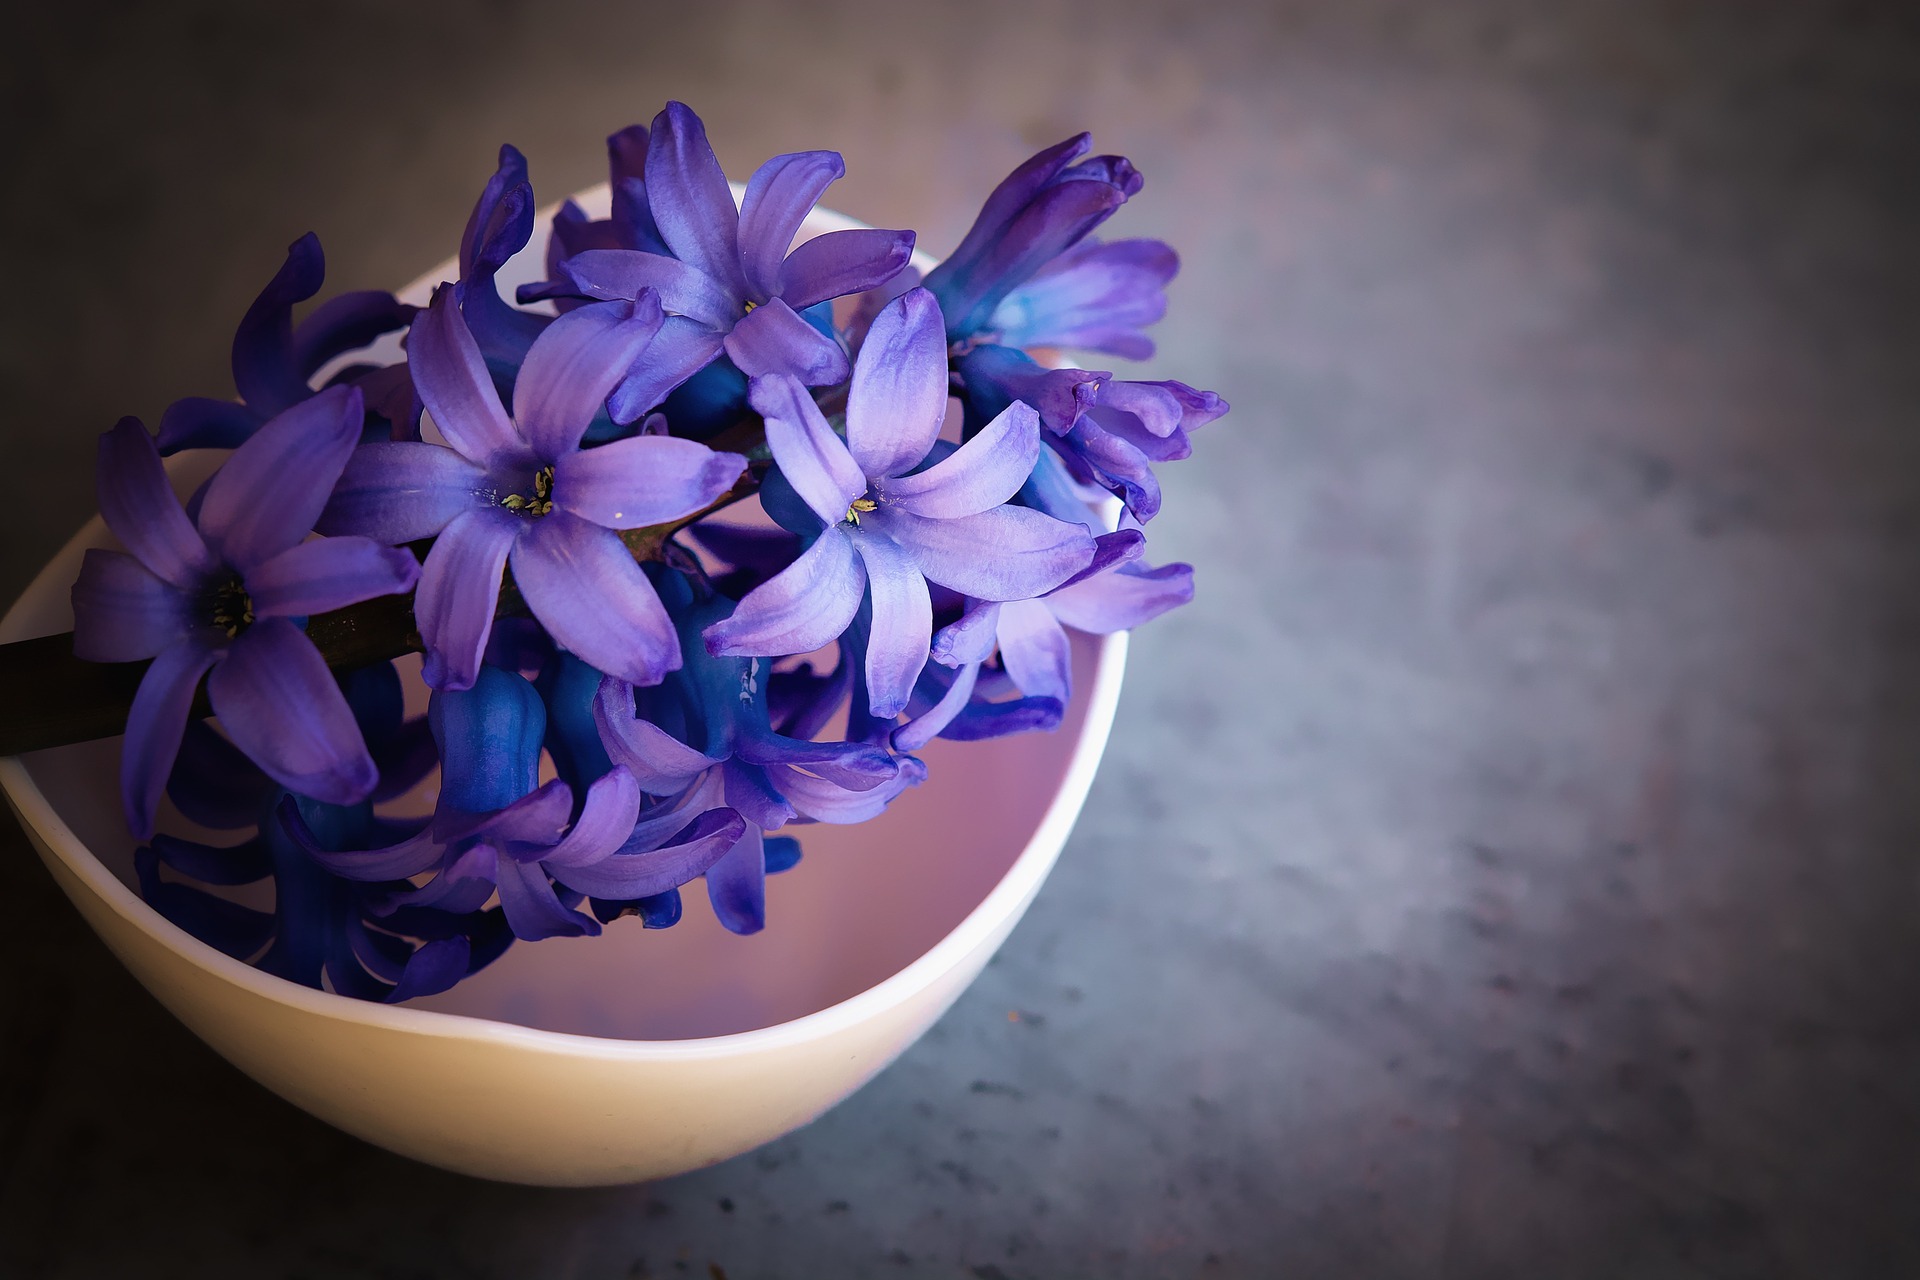 The Pantone Color of the Year for 2018 is Ultra Violet. It's present in many natural examples, including these hyacinths. Photo: Creative Commons License